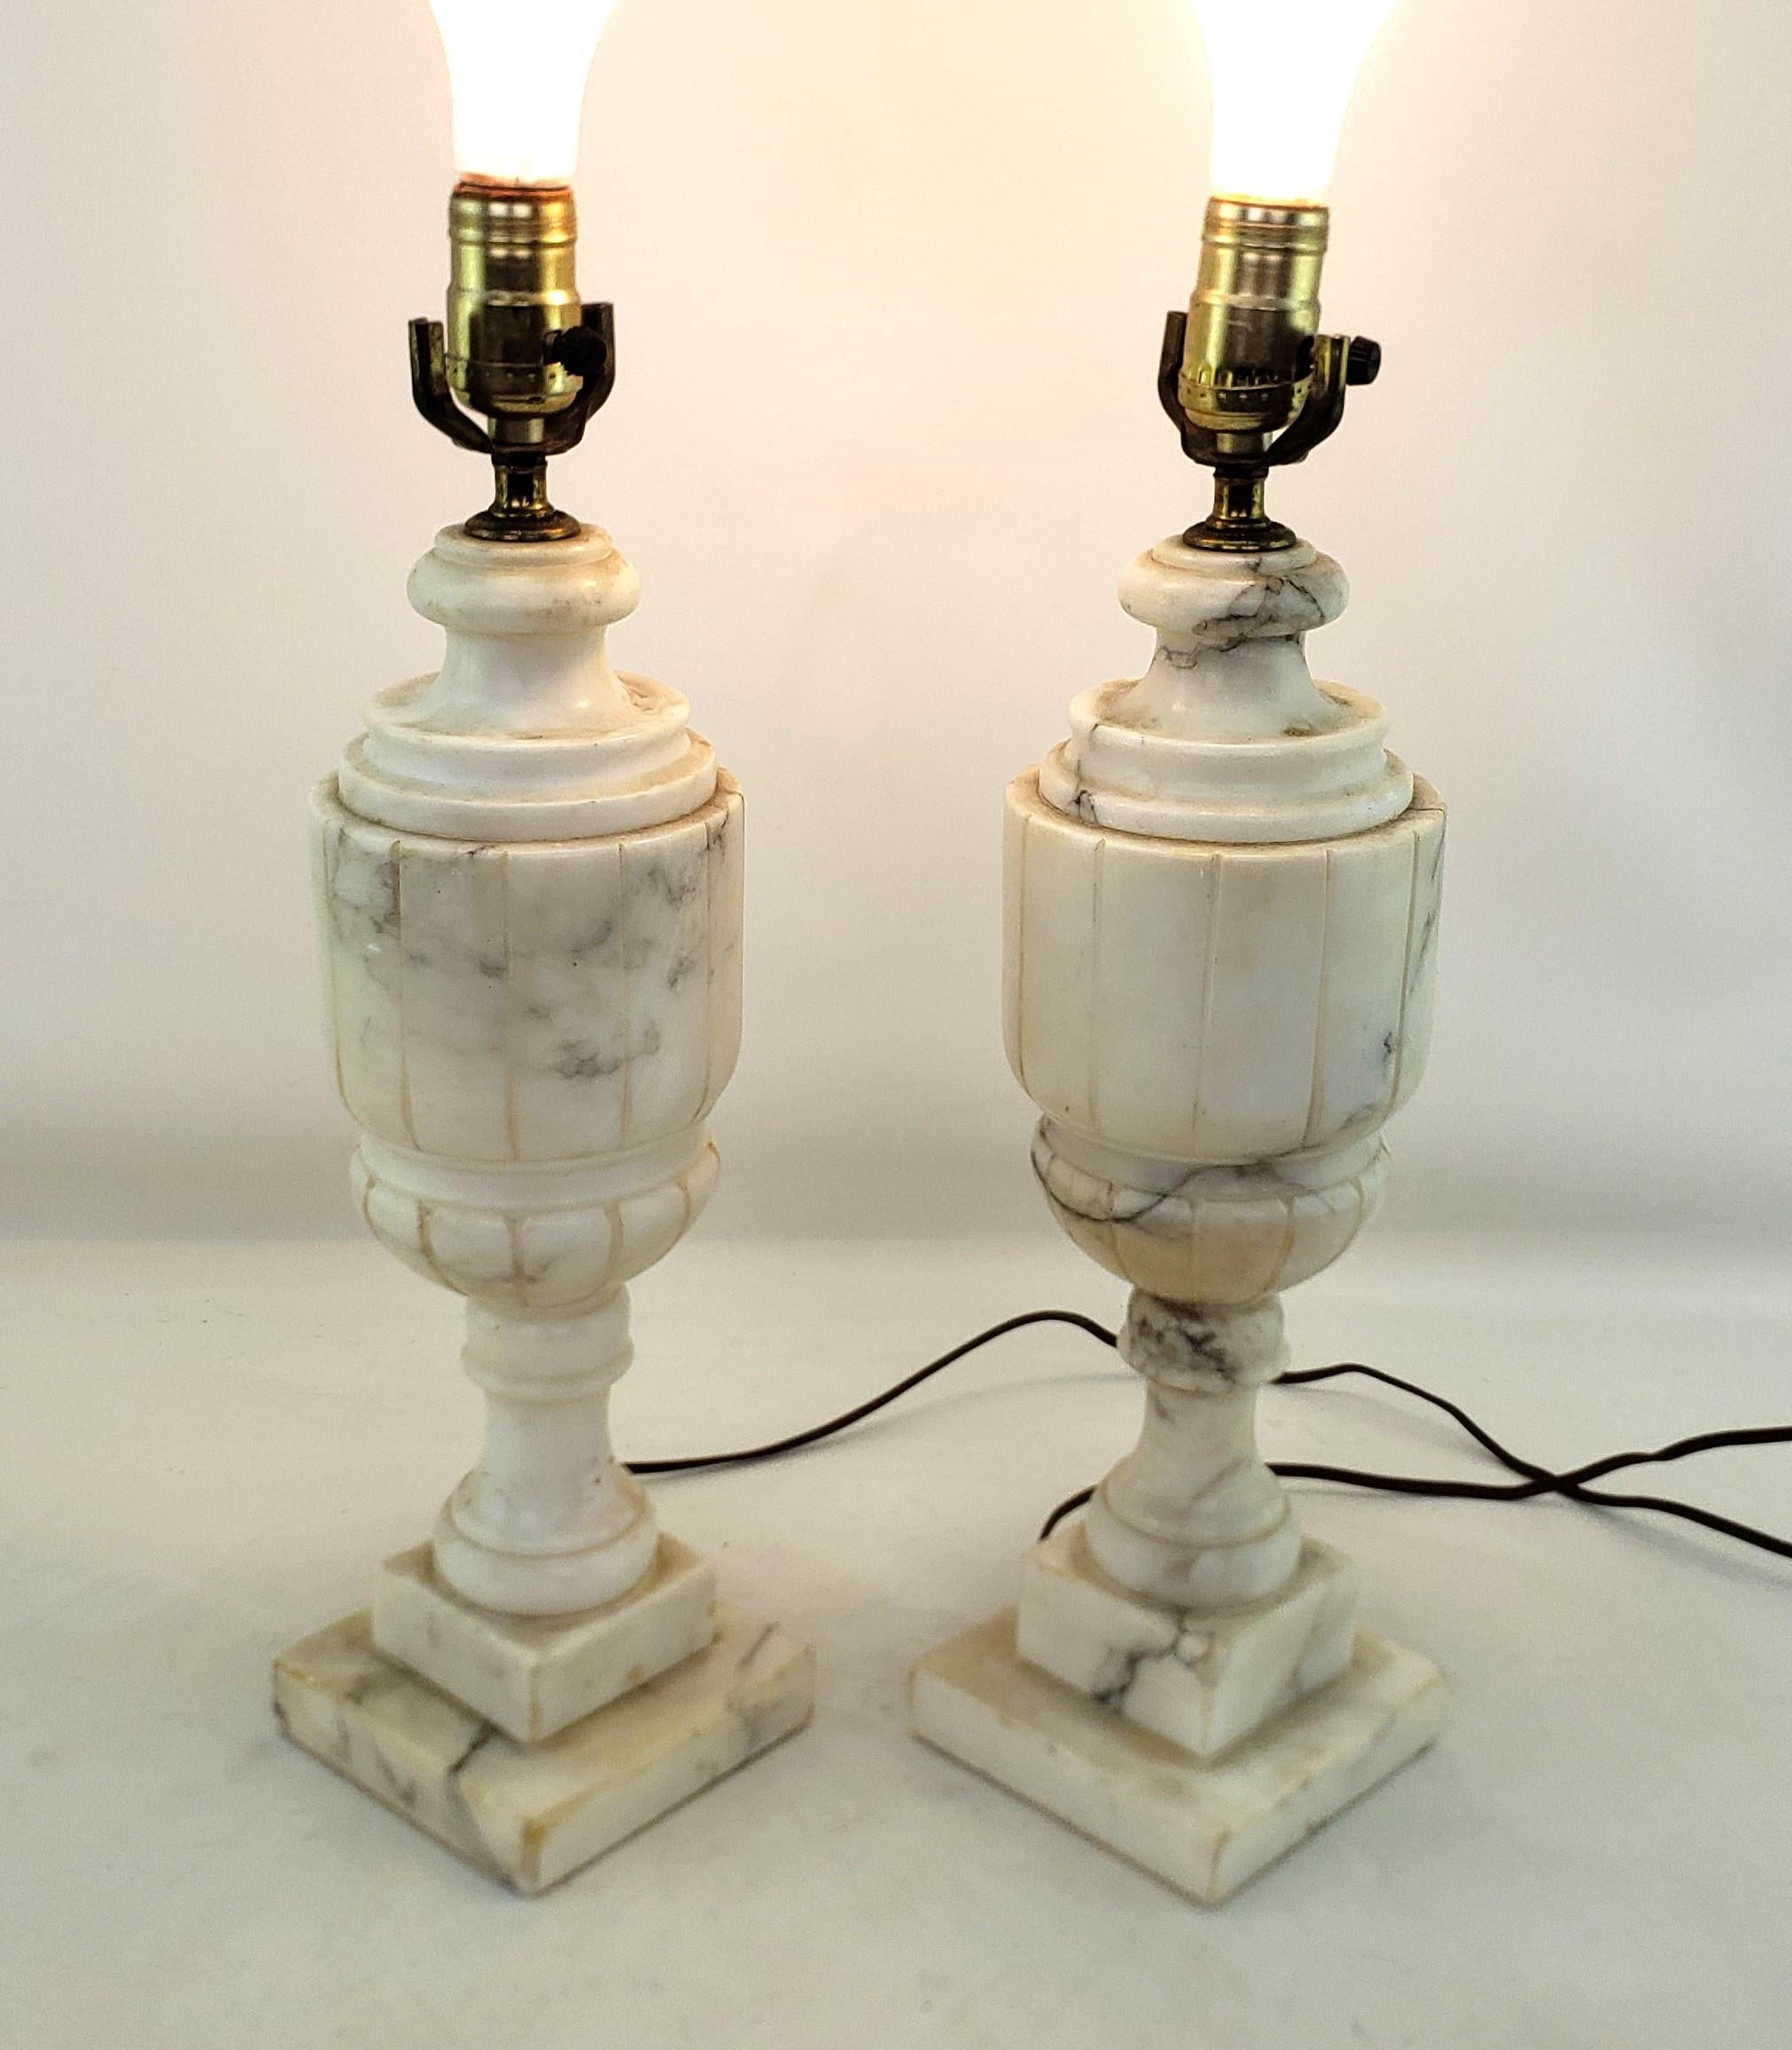 Pair of Antique Neoclassical Styled Urn Shaped Carved Alabaster Table Lamp Bases In Good Condition For Sale In Hamilton, Ontario